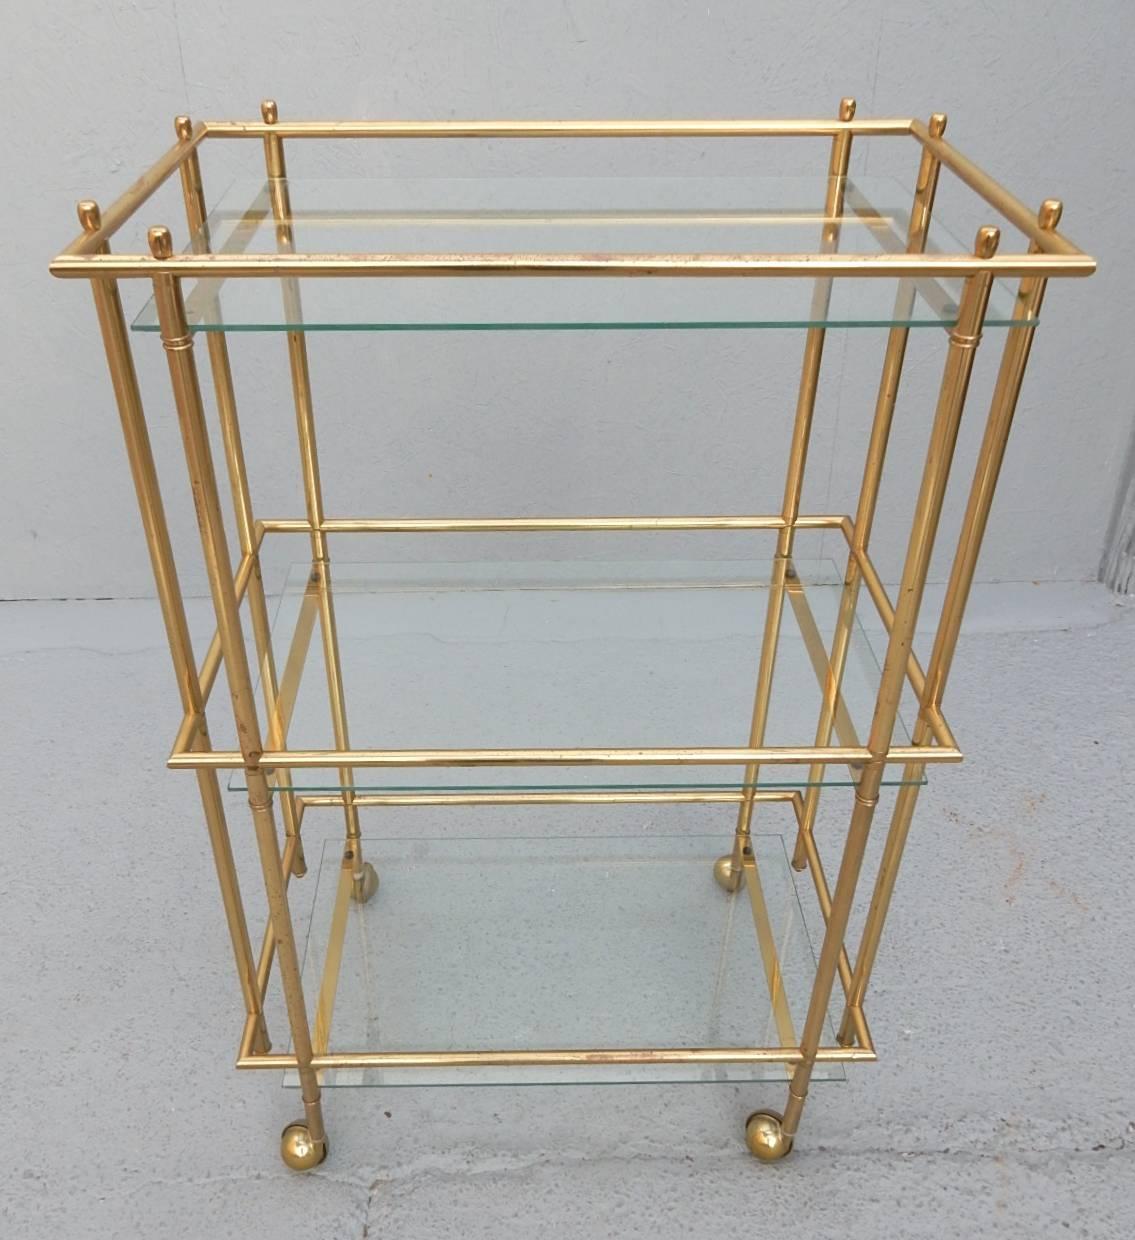 Exceptional tall bar cart with three levels. Angular brass tube design. Very nice quality piece circa 1970s. 
Designer unknown.